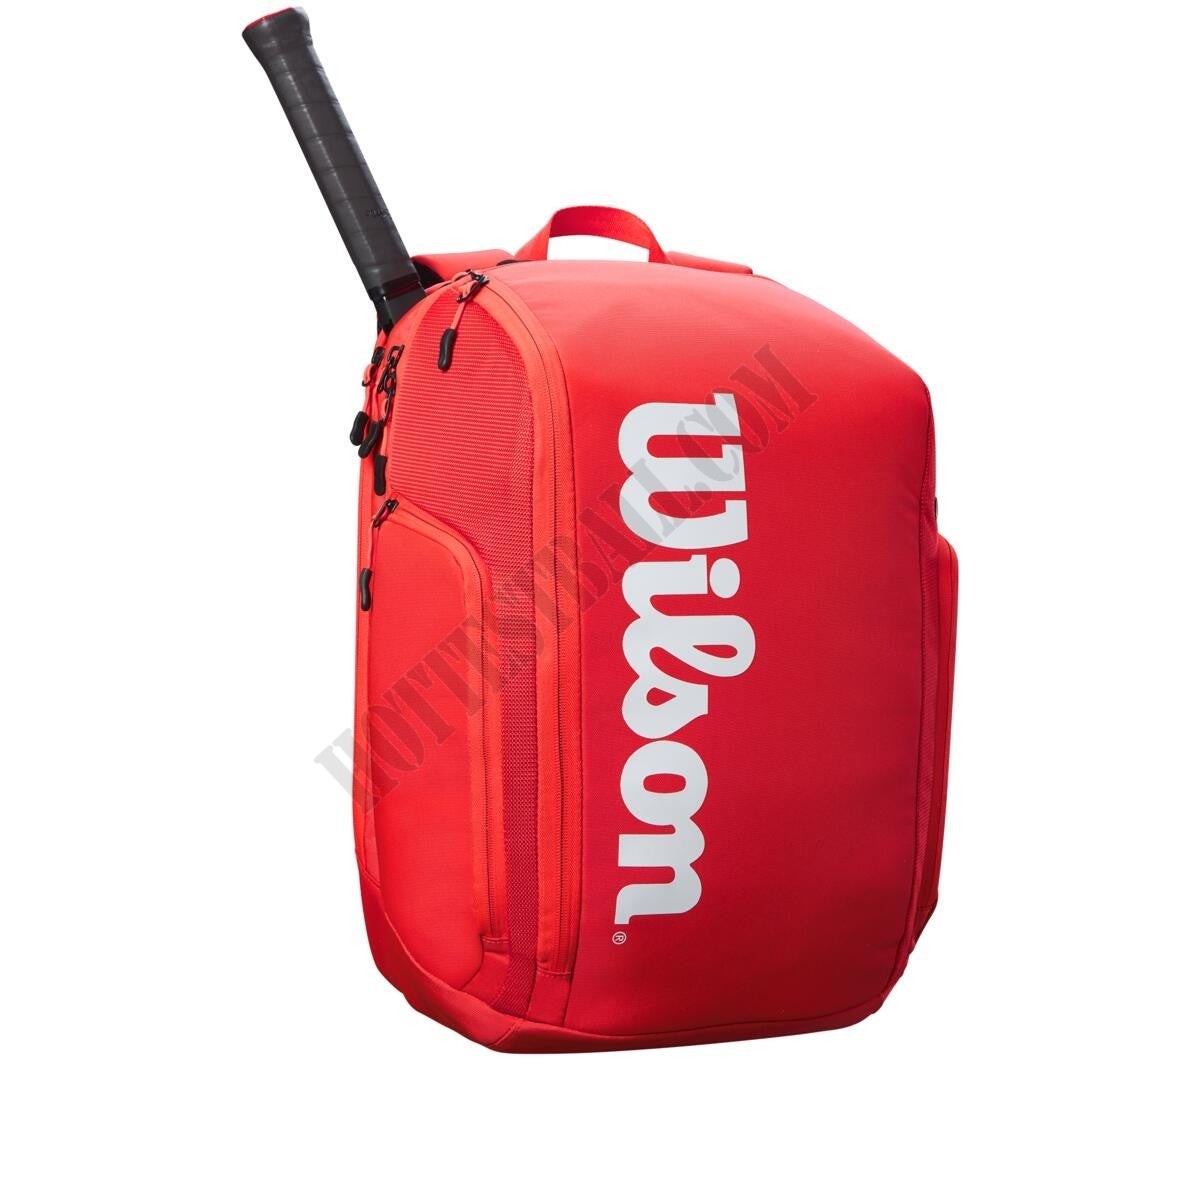 Super Tour Backpack - Wilson Discount Store - Super Tour Backpack - Wilson Discount Store